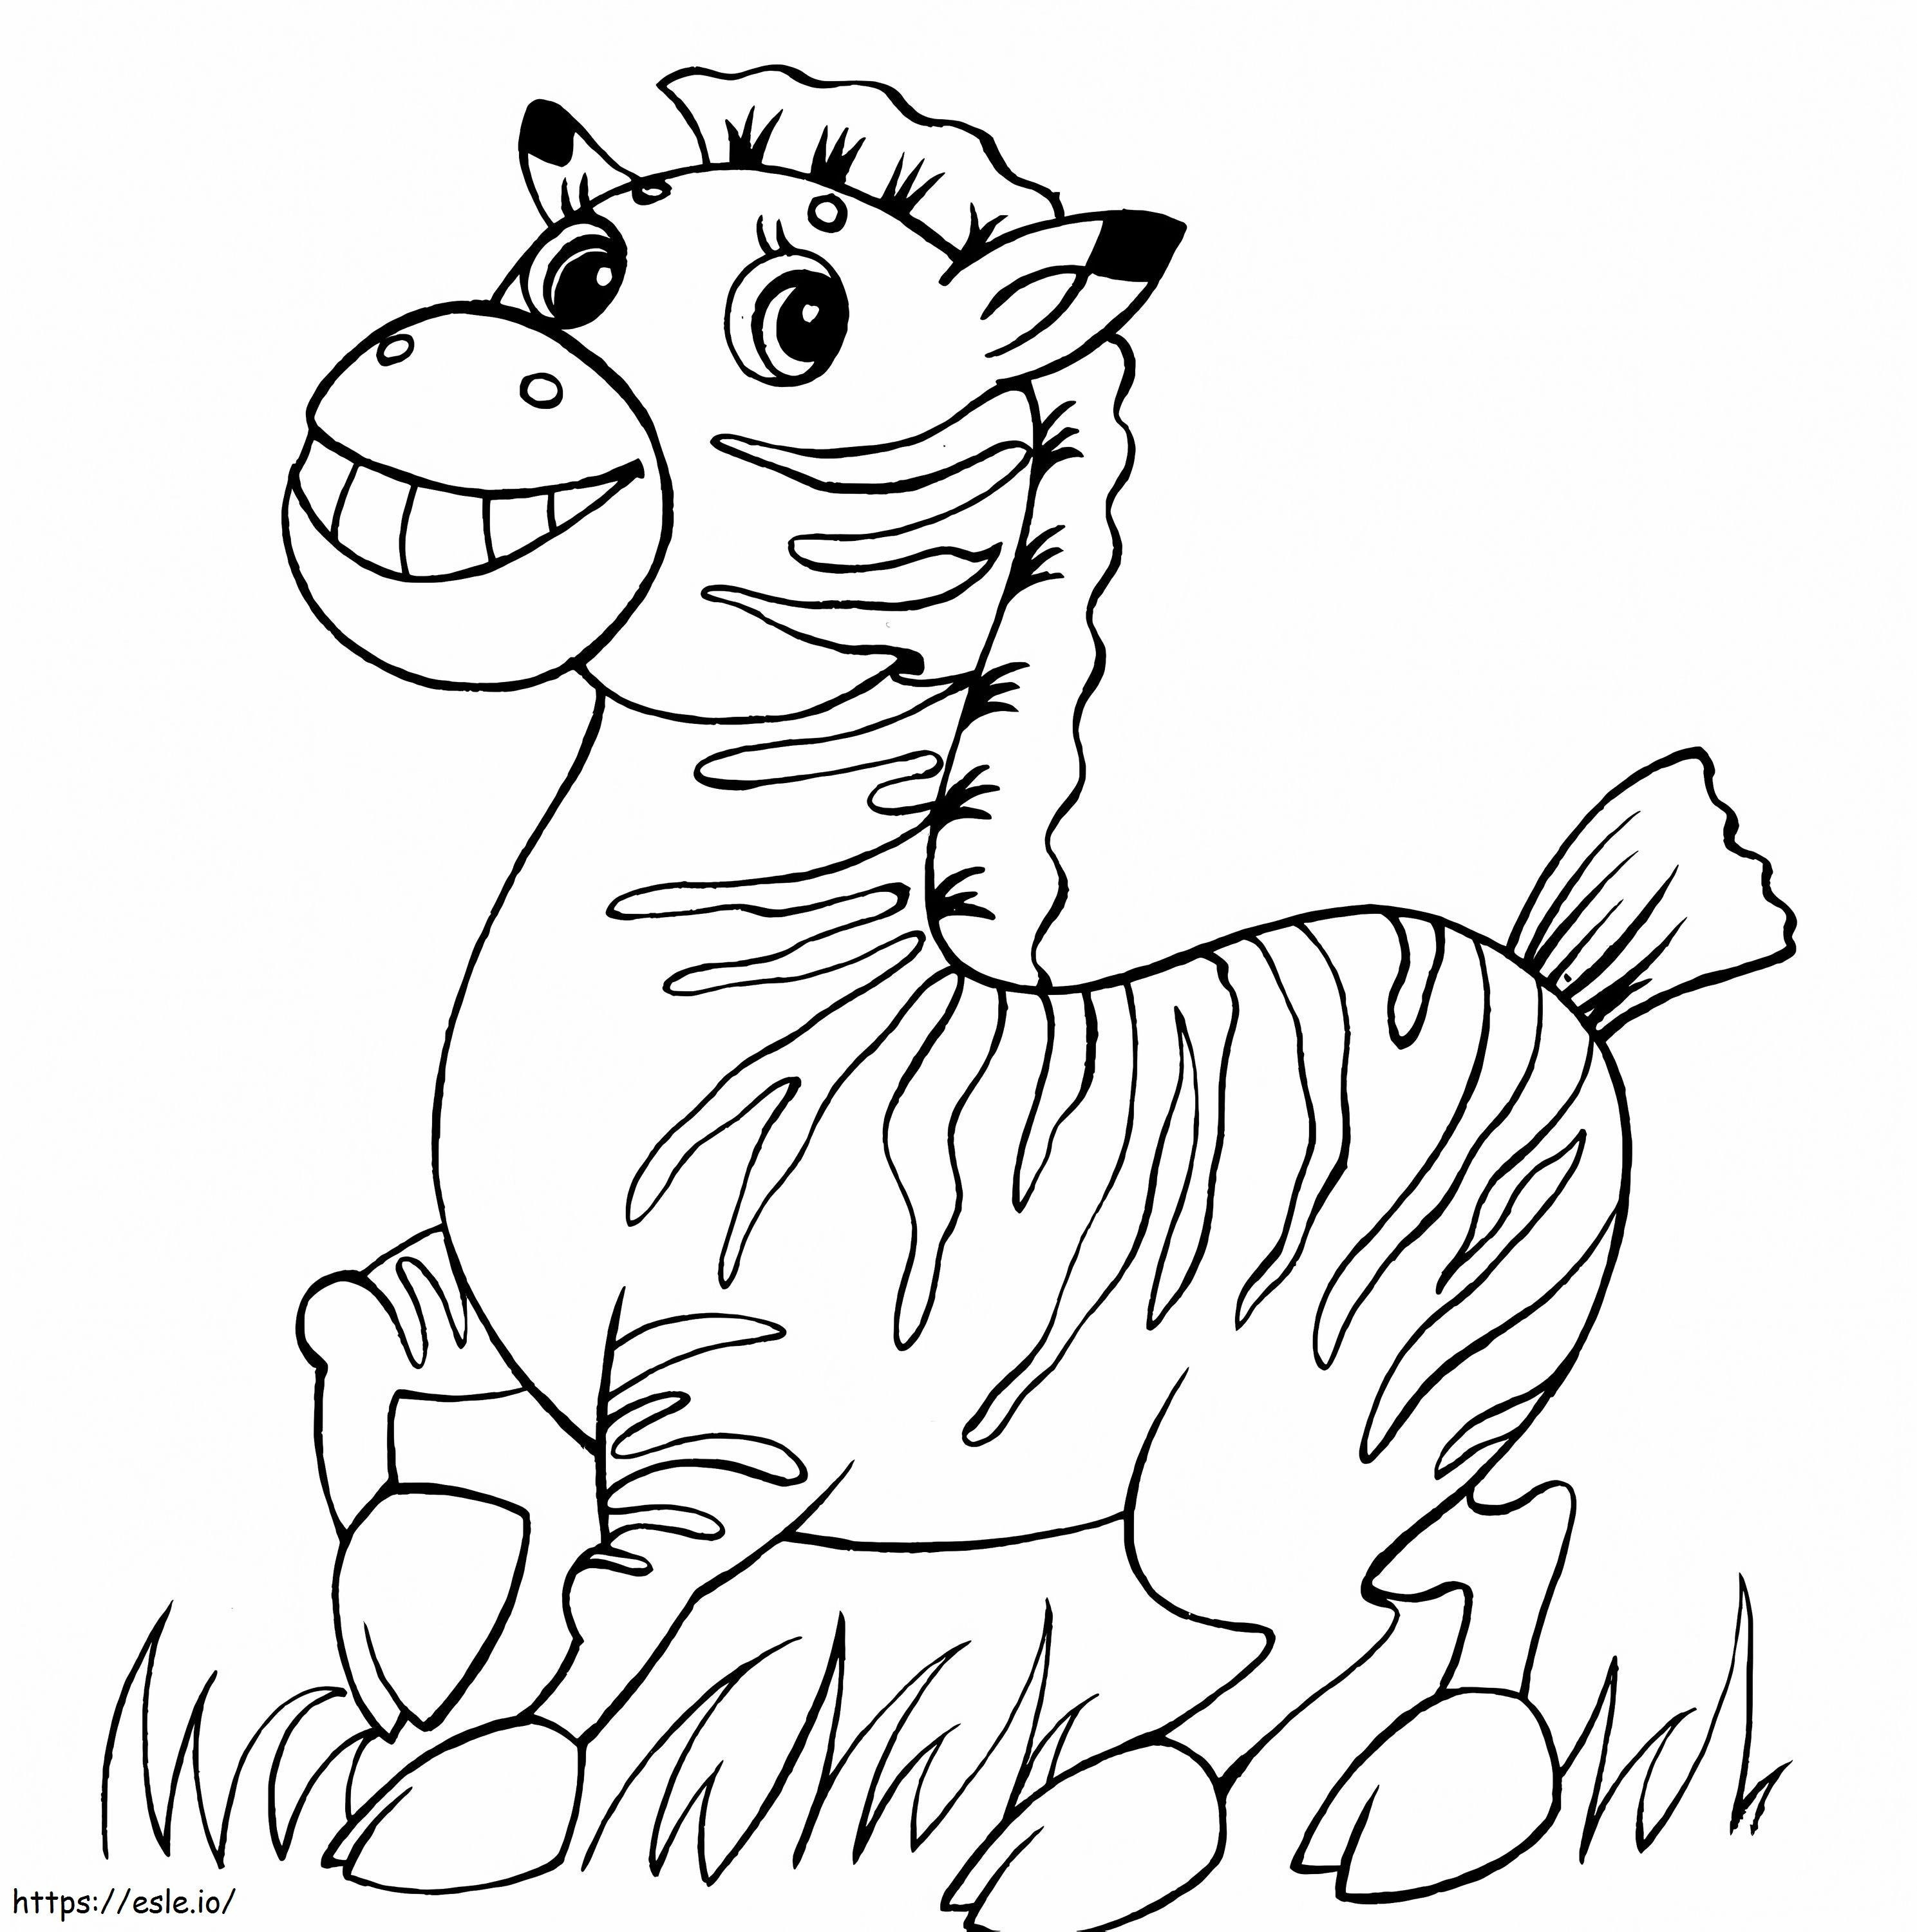 1548314902 Funny Zebra coloring page